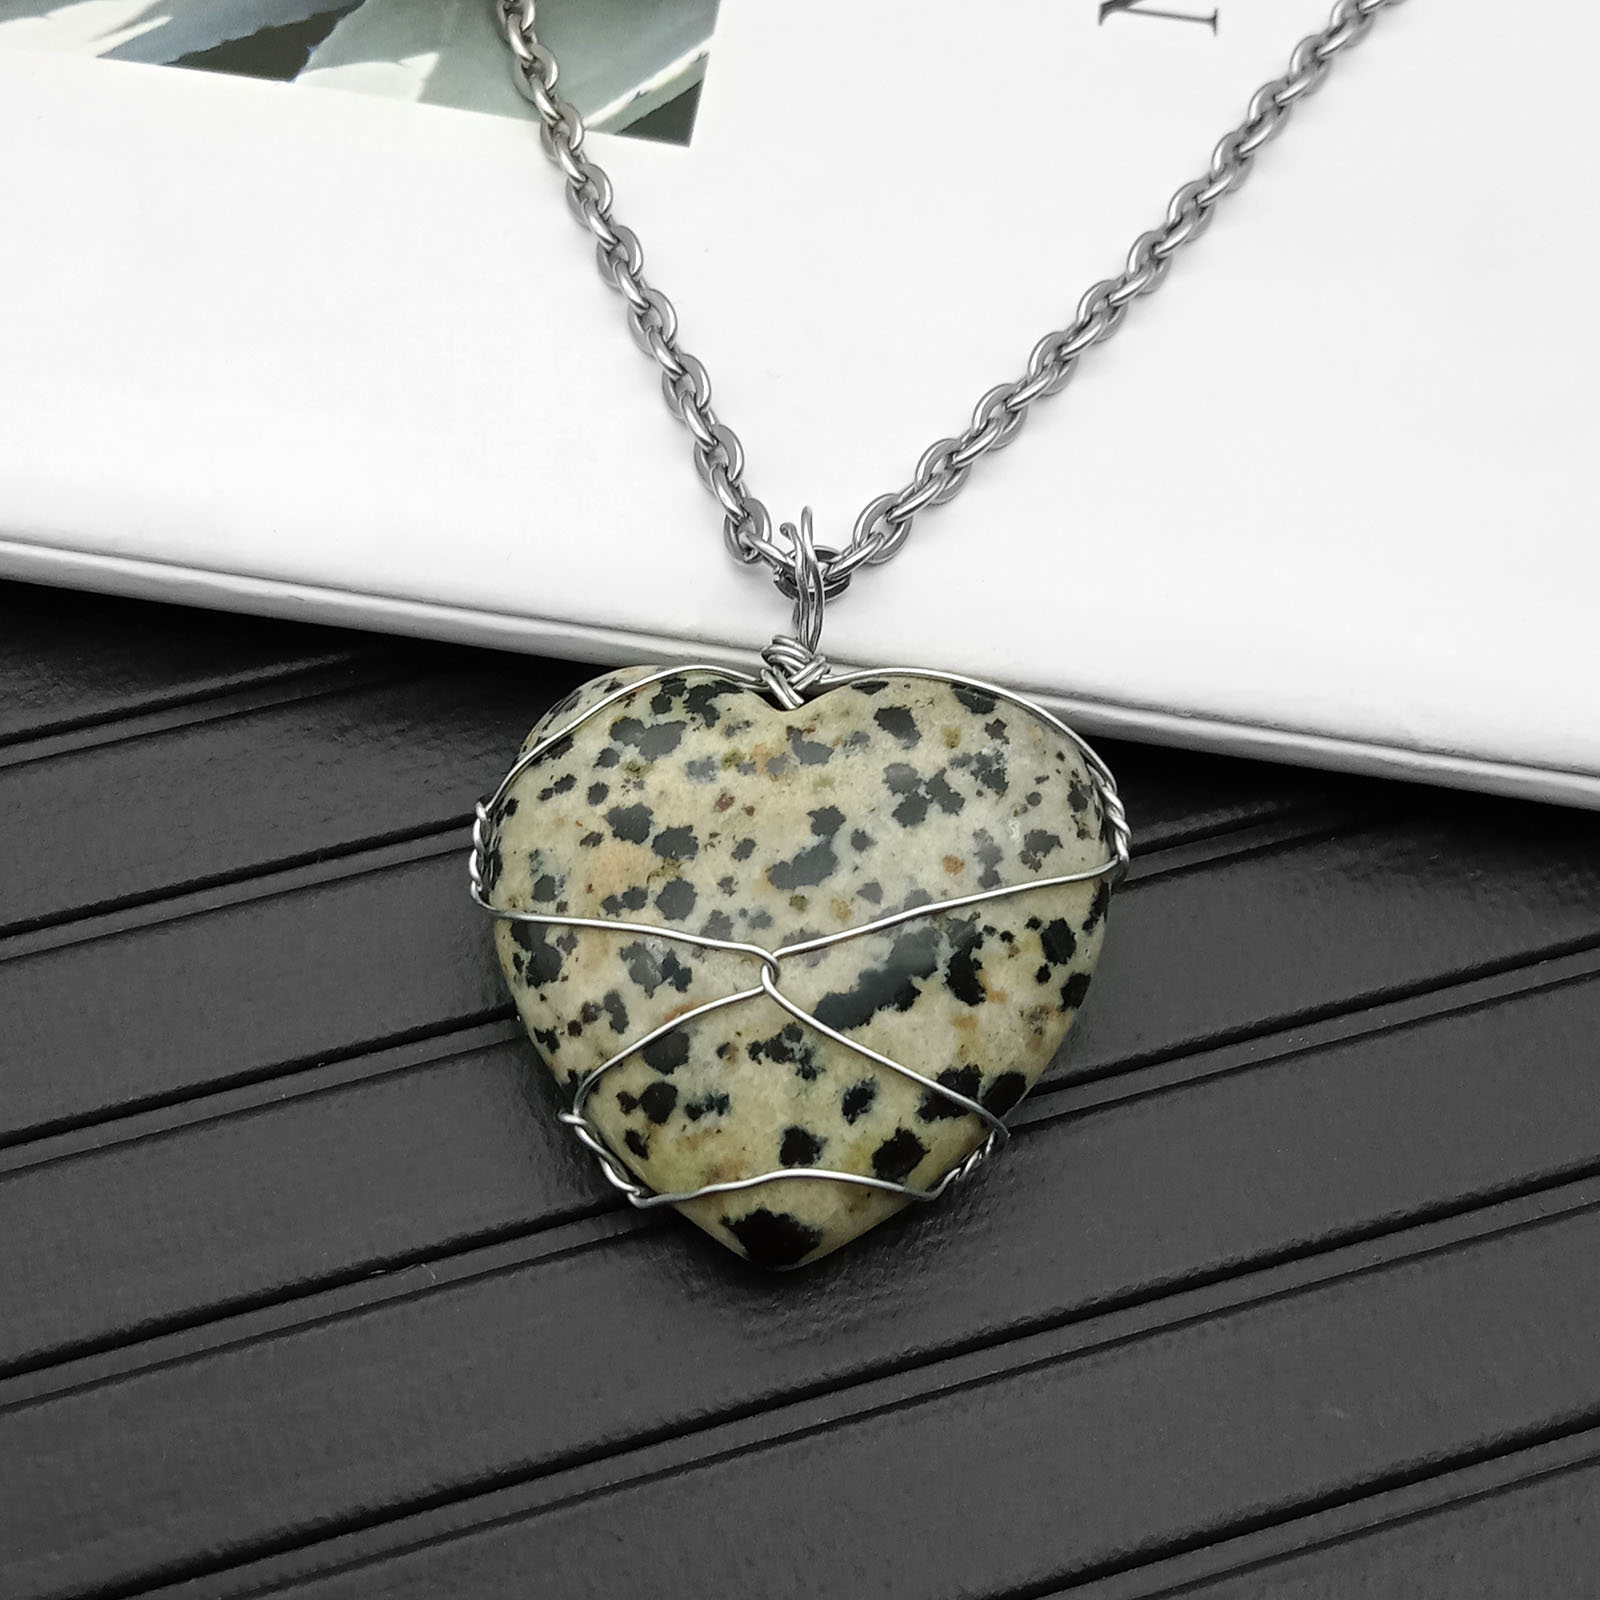 Speckled stone